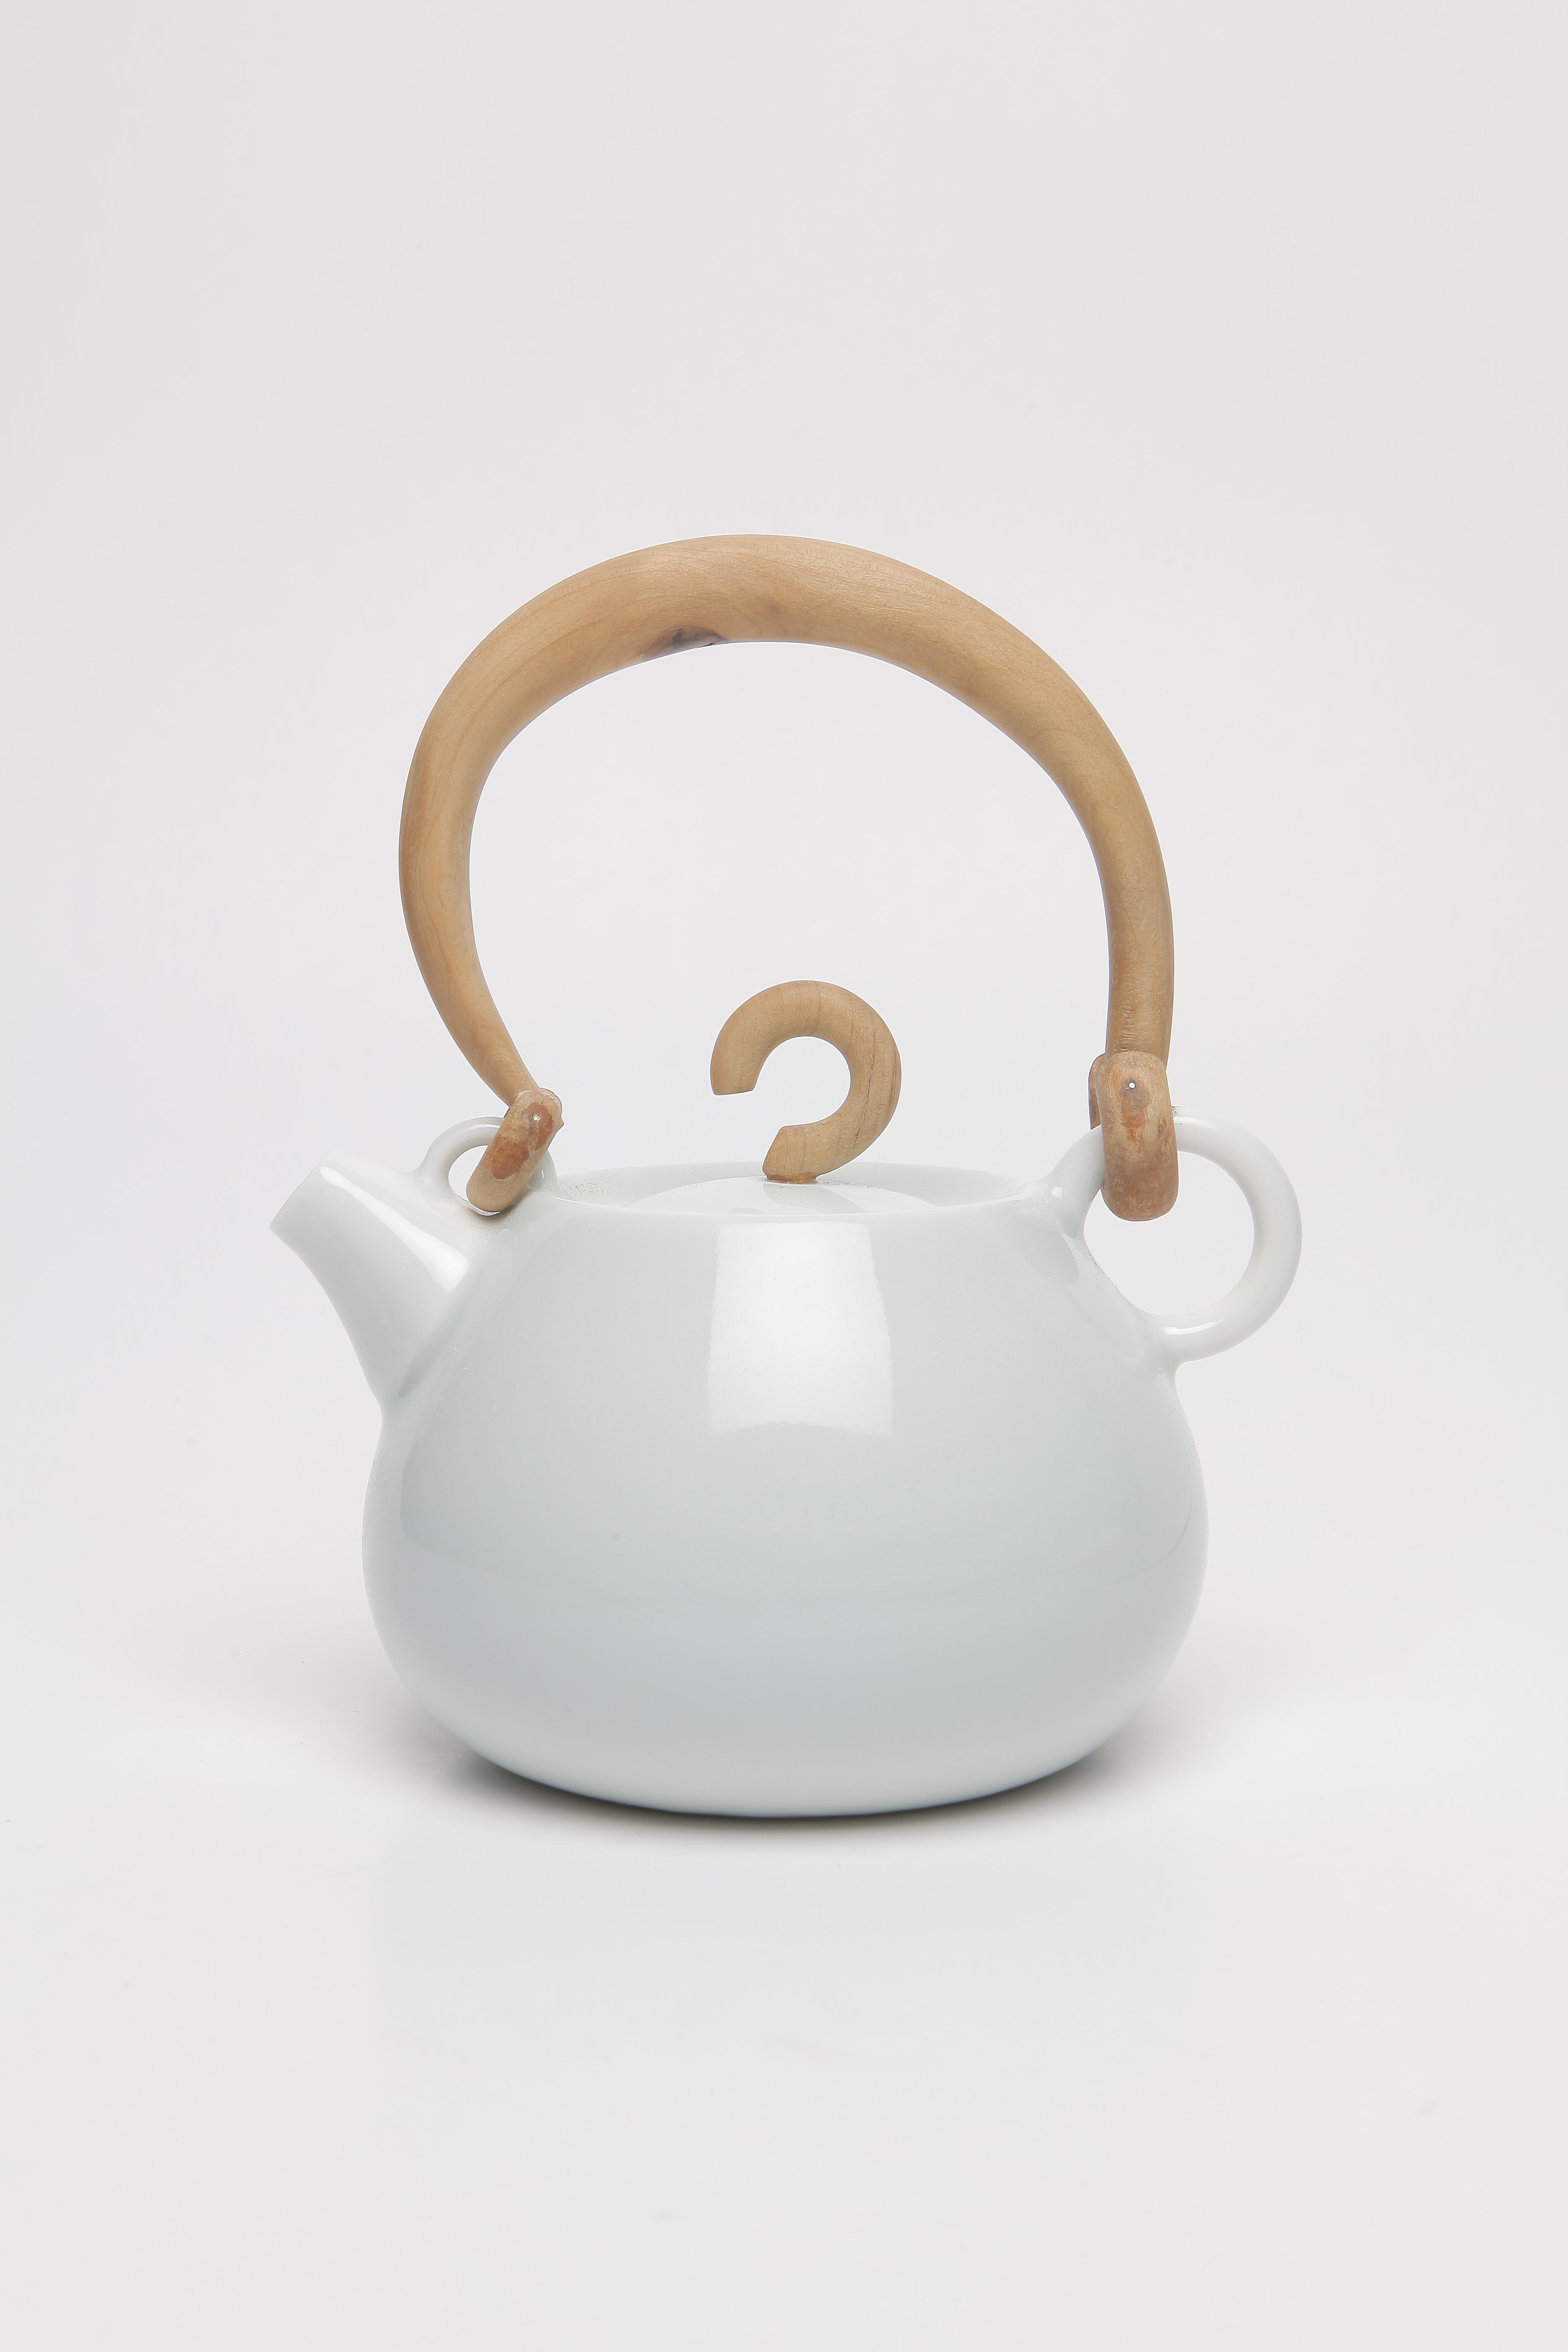 A ceramic teapot with an intricate handle.